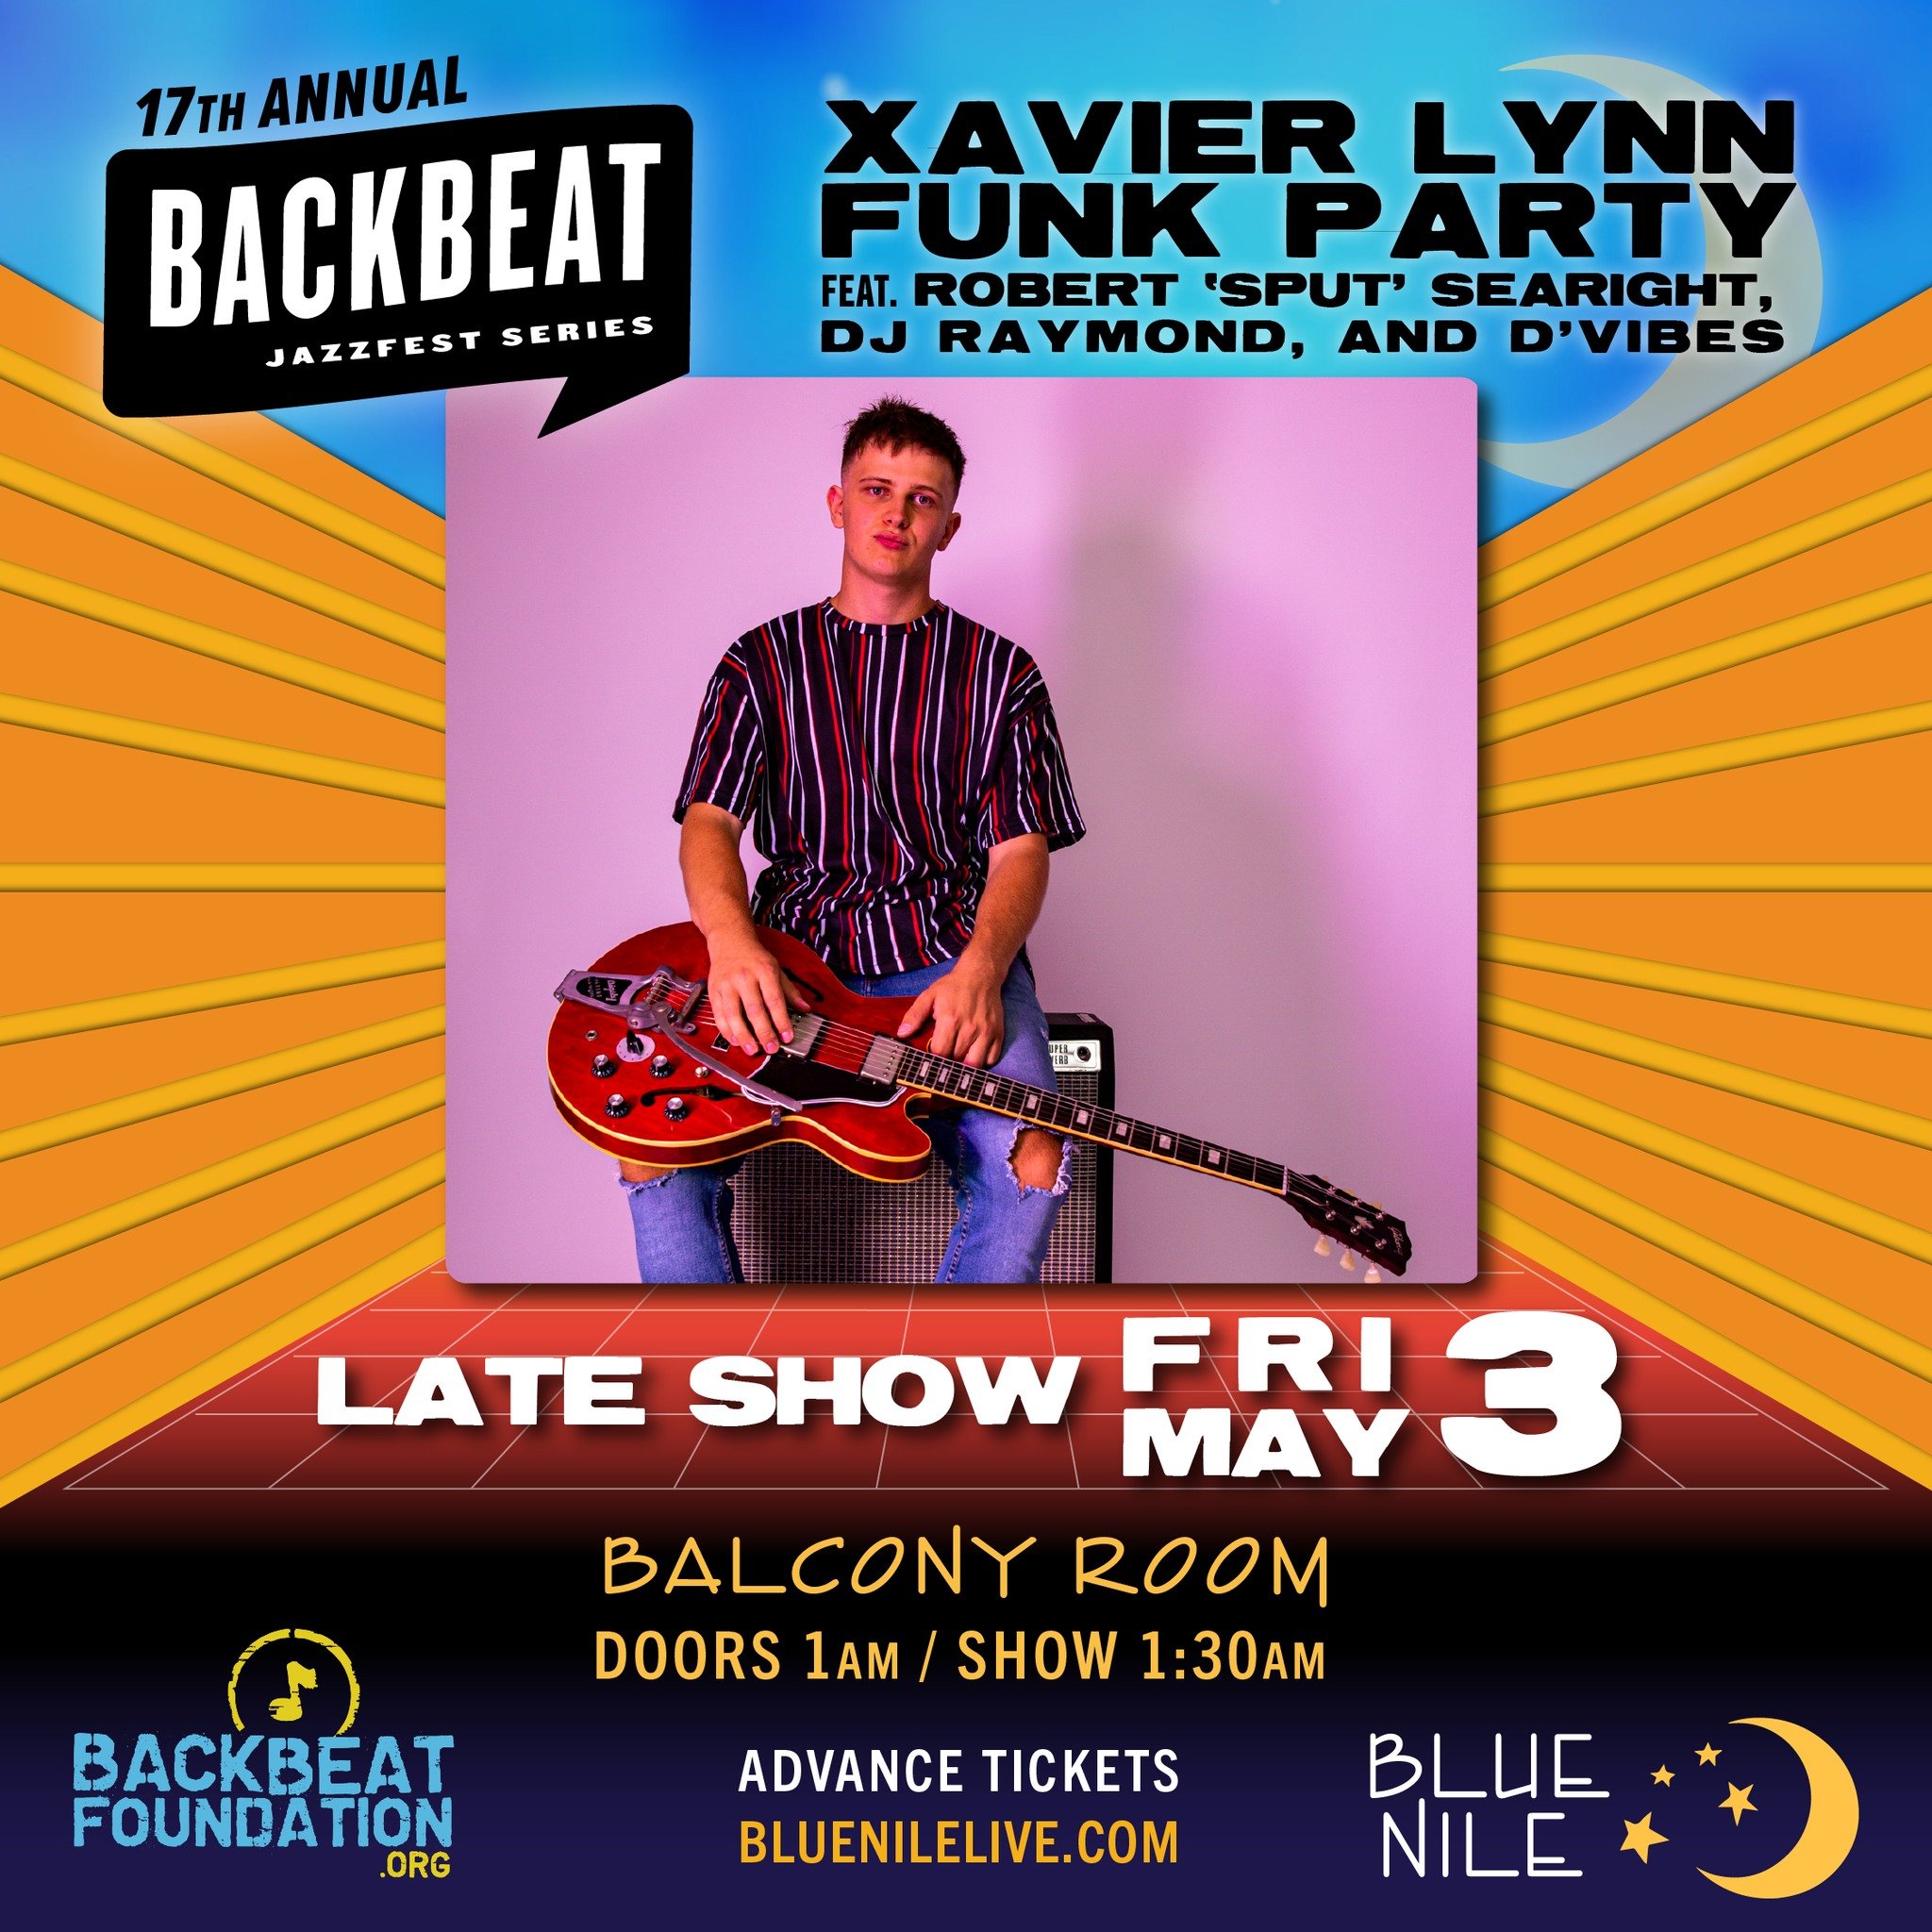 17th Annual Backbeat JazzFest Series presents Xavier Lynn Funk Party feat. Robert &lsquo;Sput&rsquo; Searight, DJ Raymond, and D'Vibes!
LATE SHOW Friday May 3 at 1:30AM (technically this show starts early morning May 4).
 ✨🌙
ADVANCE TICKETS ON SALE 